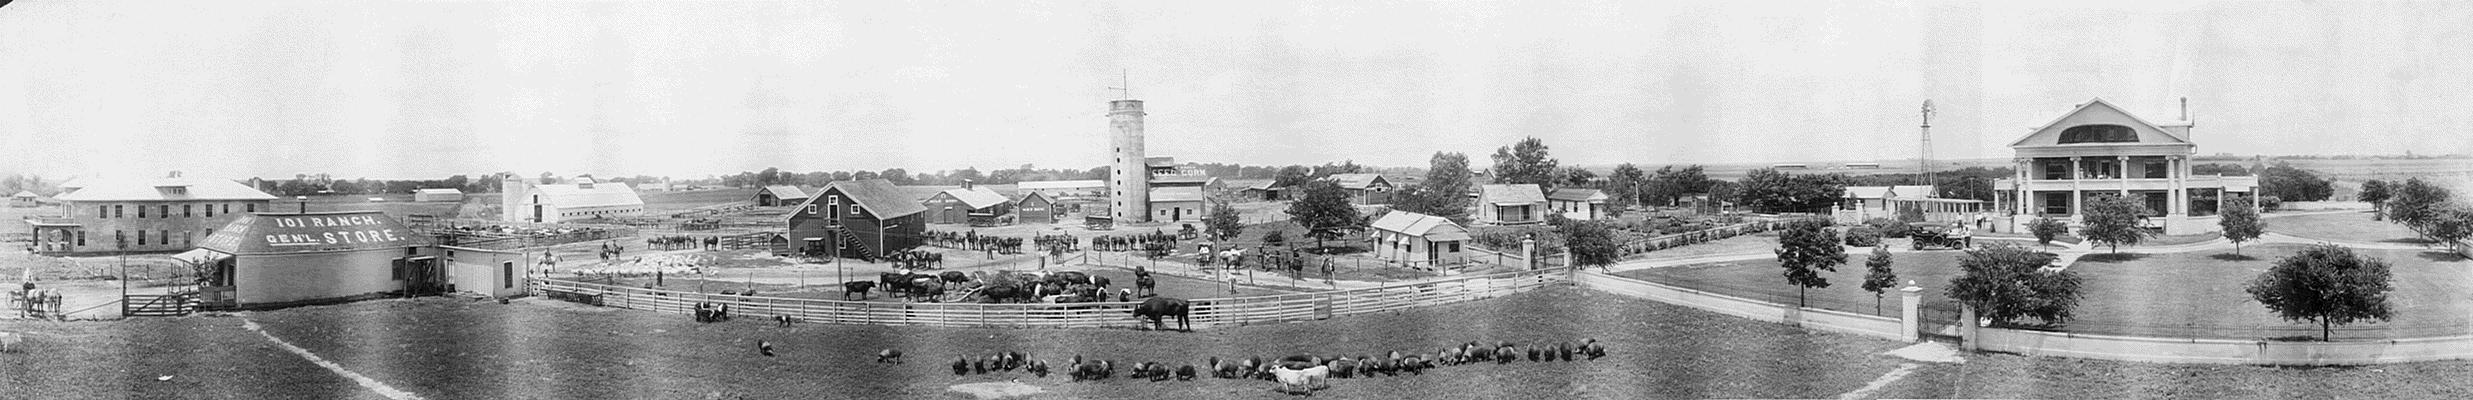 View of farm buildings, residences, ranch hands, farm machinery, and animals at the 101 Ranch in Oklahoma, between Ponca City and Perry. The ranch was owned by the Miller family.